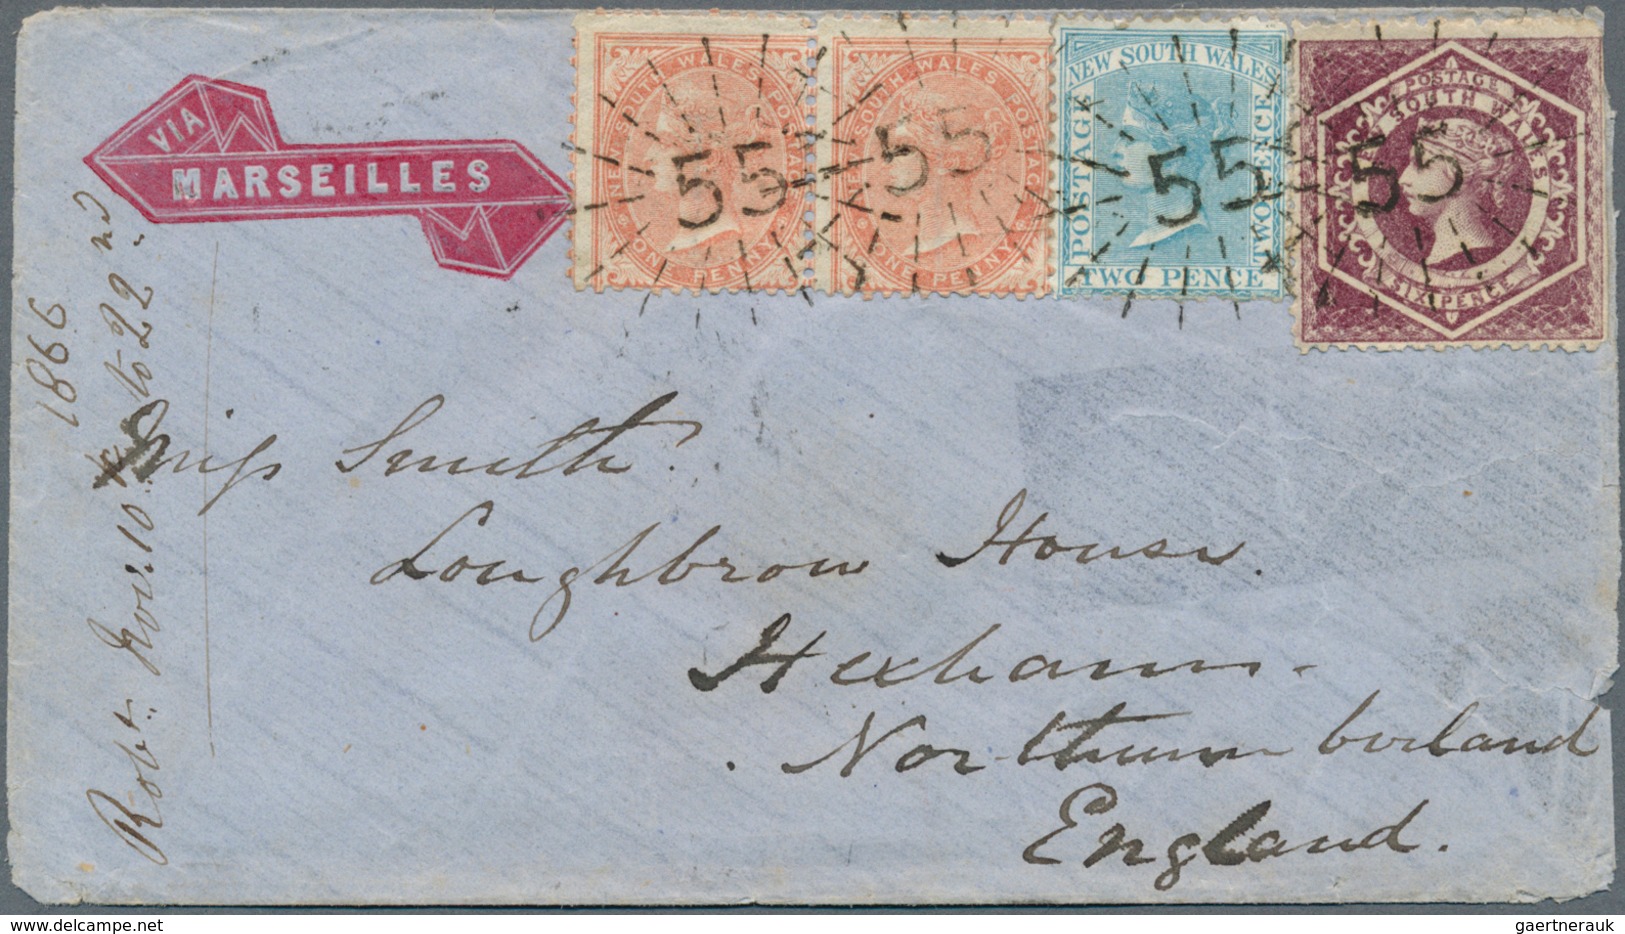 Neusüdwales: 1866, 2 X 1 D Brick-red, 2 D Pale Blue And 6 D Purple (imperforated At Right), Each Tie - Lettres & Documents